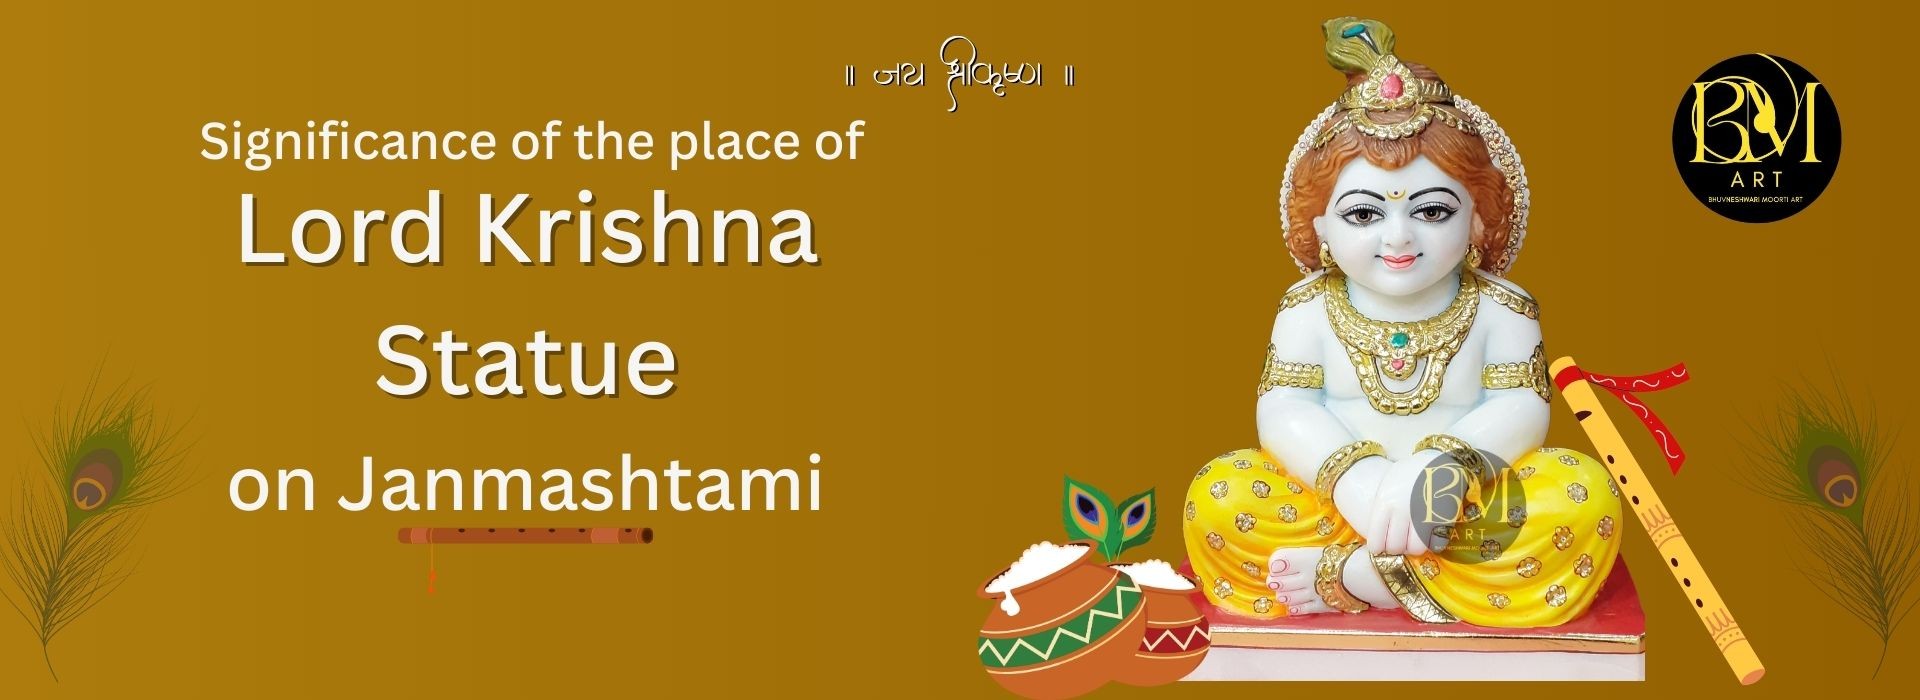 Significance of the place of Lord Krishna Statue on Janmashtami